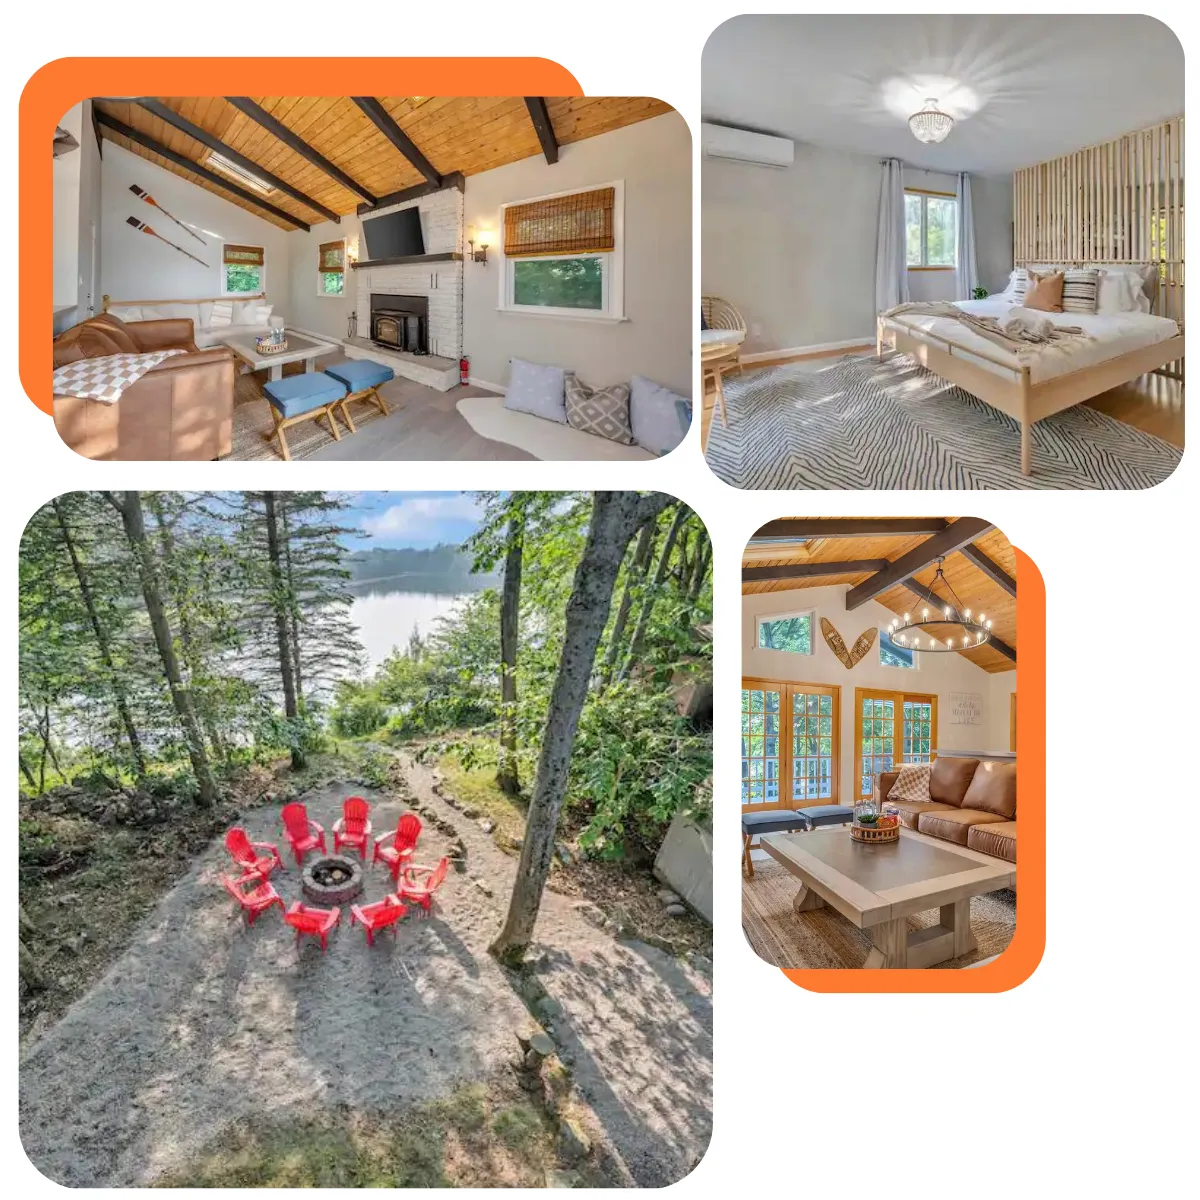 Lakefront Pocono Getaway: Experience the perfect blend of comfort and adventure. This lakeside retreat offers generous living space, stunning Lakefront Pocono views, a fun game room, and a spacious deck